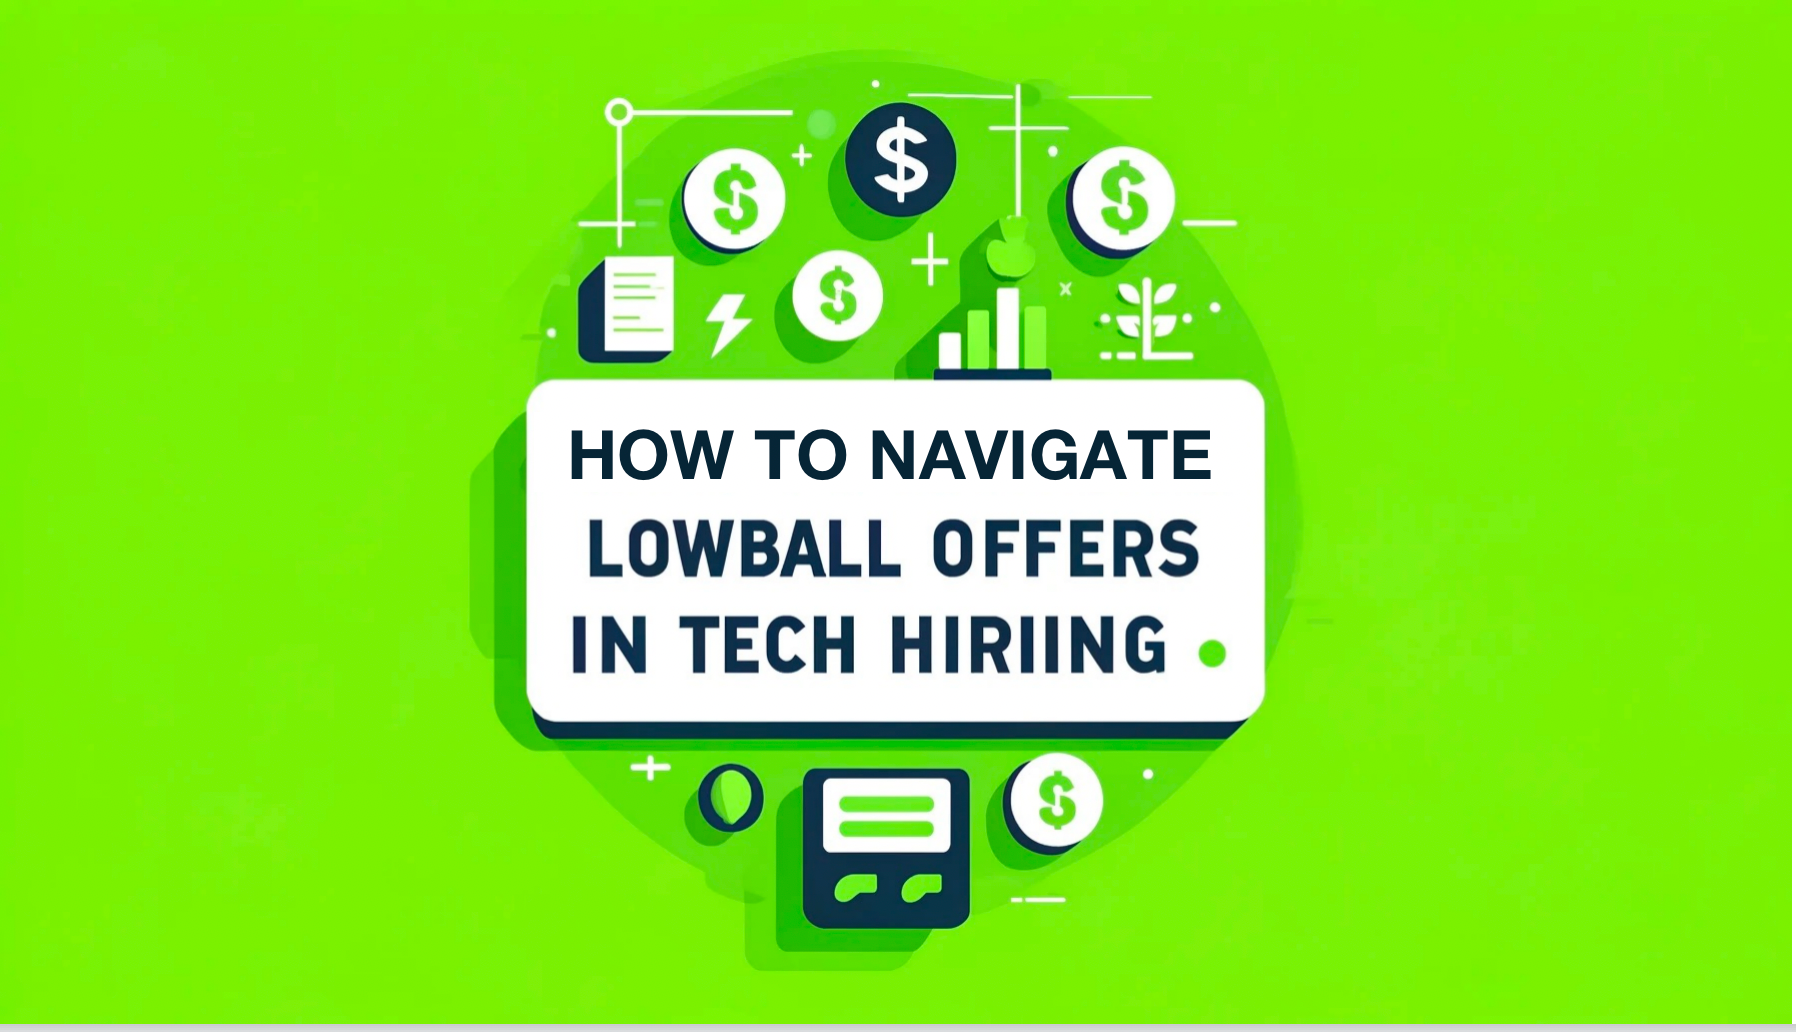 How to Navigate Lowball Offers in Tech Hiring